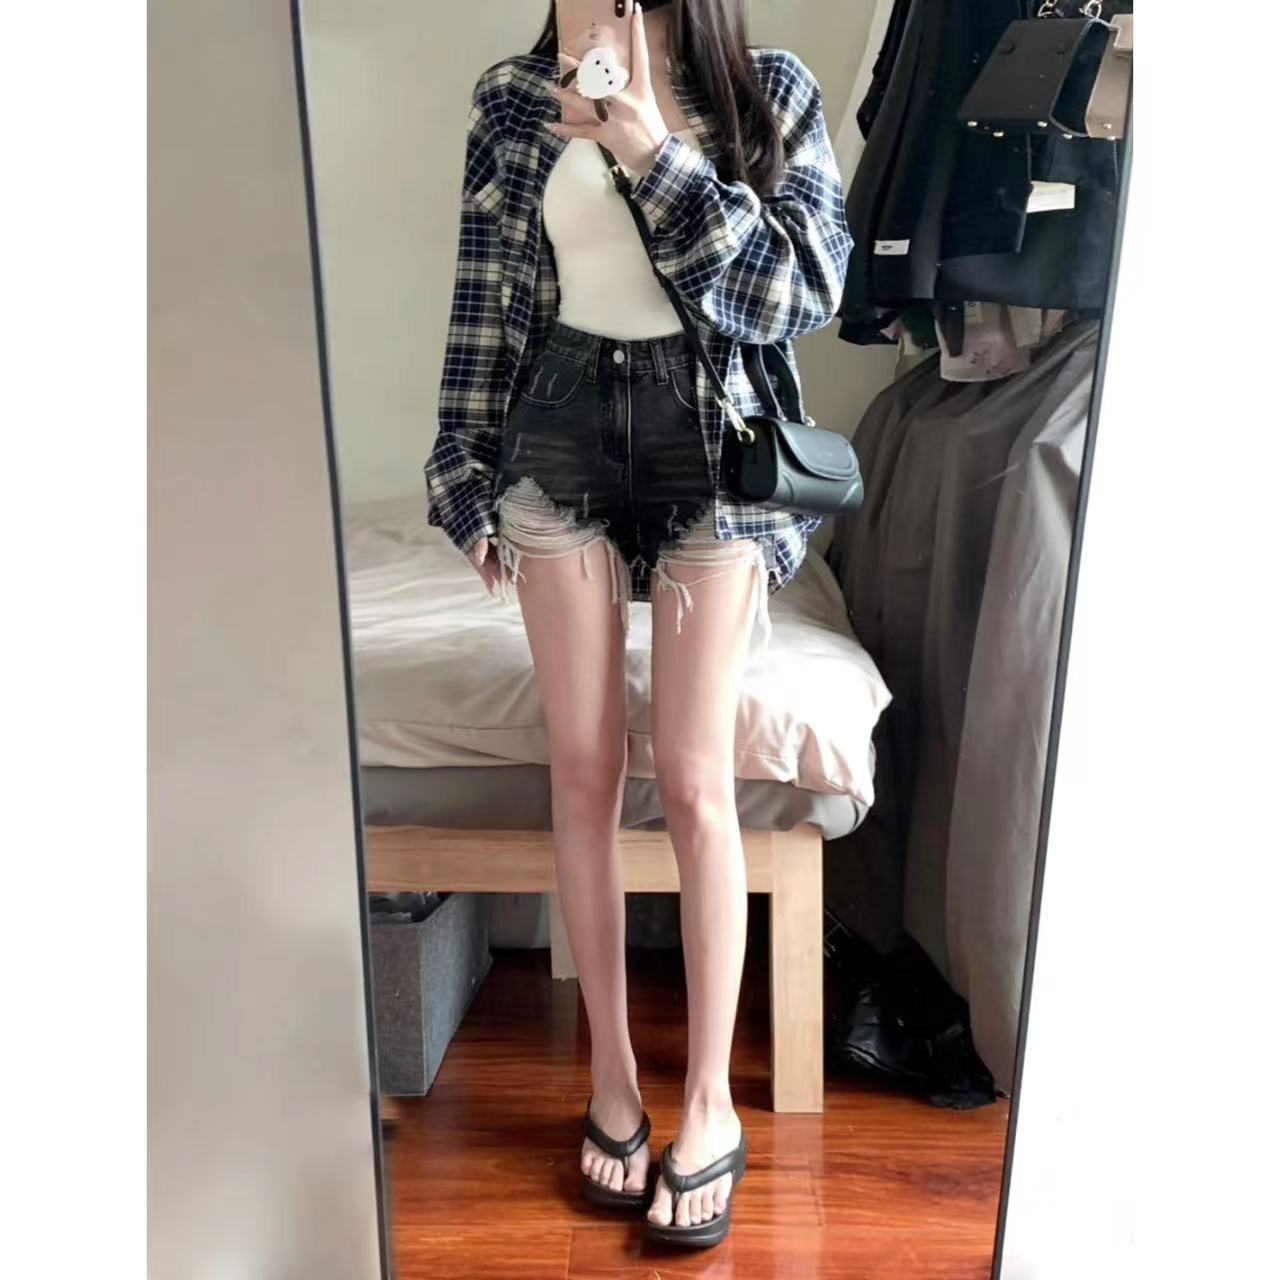 Black and gray raw edge denim shorts women's high waist washed ripped raw edge American style package buttocks showing legs long hot girl hot pants